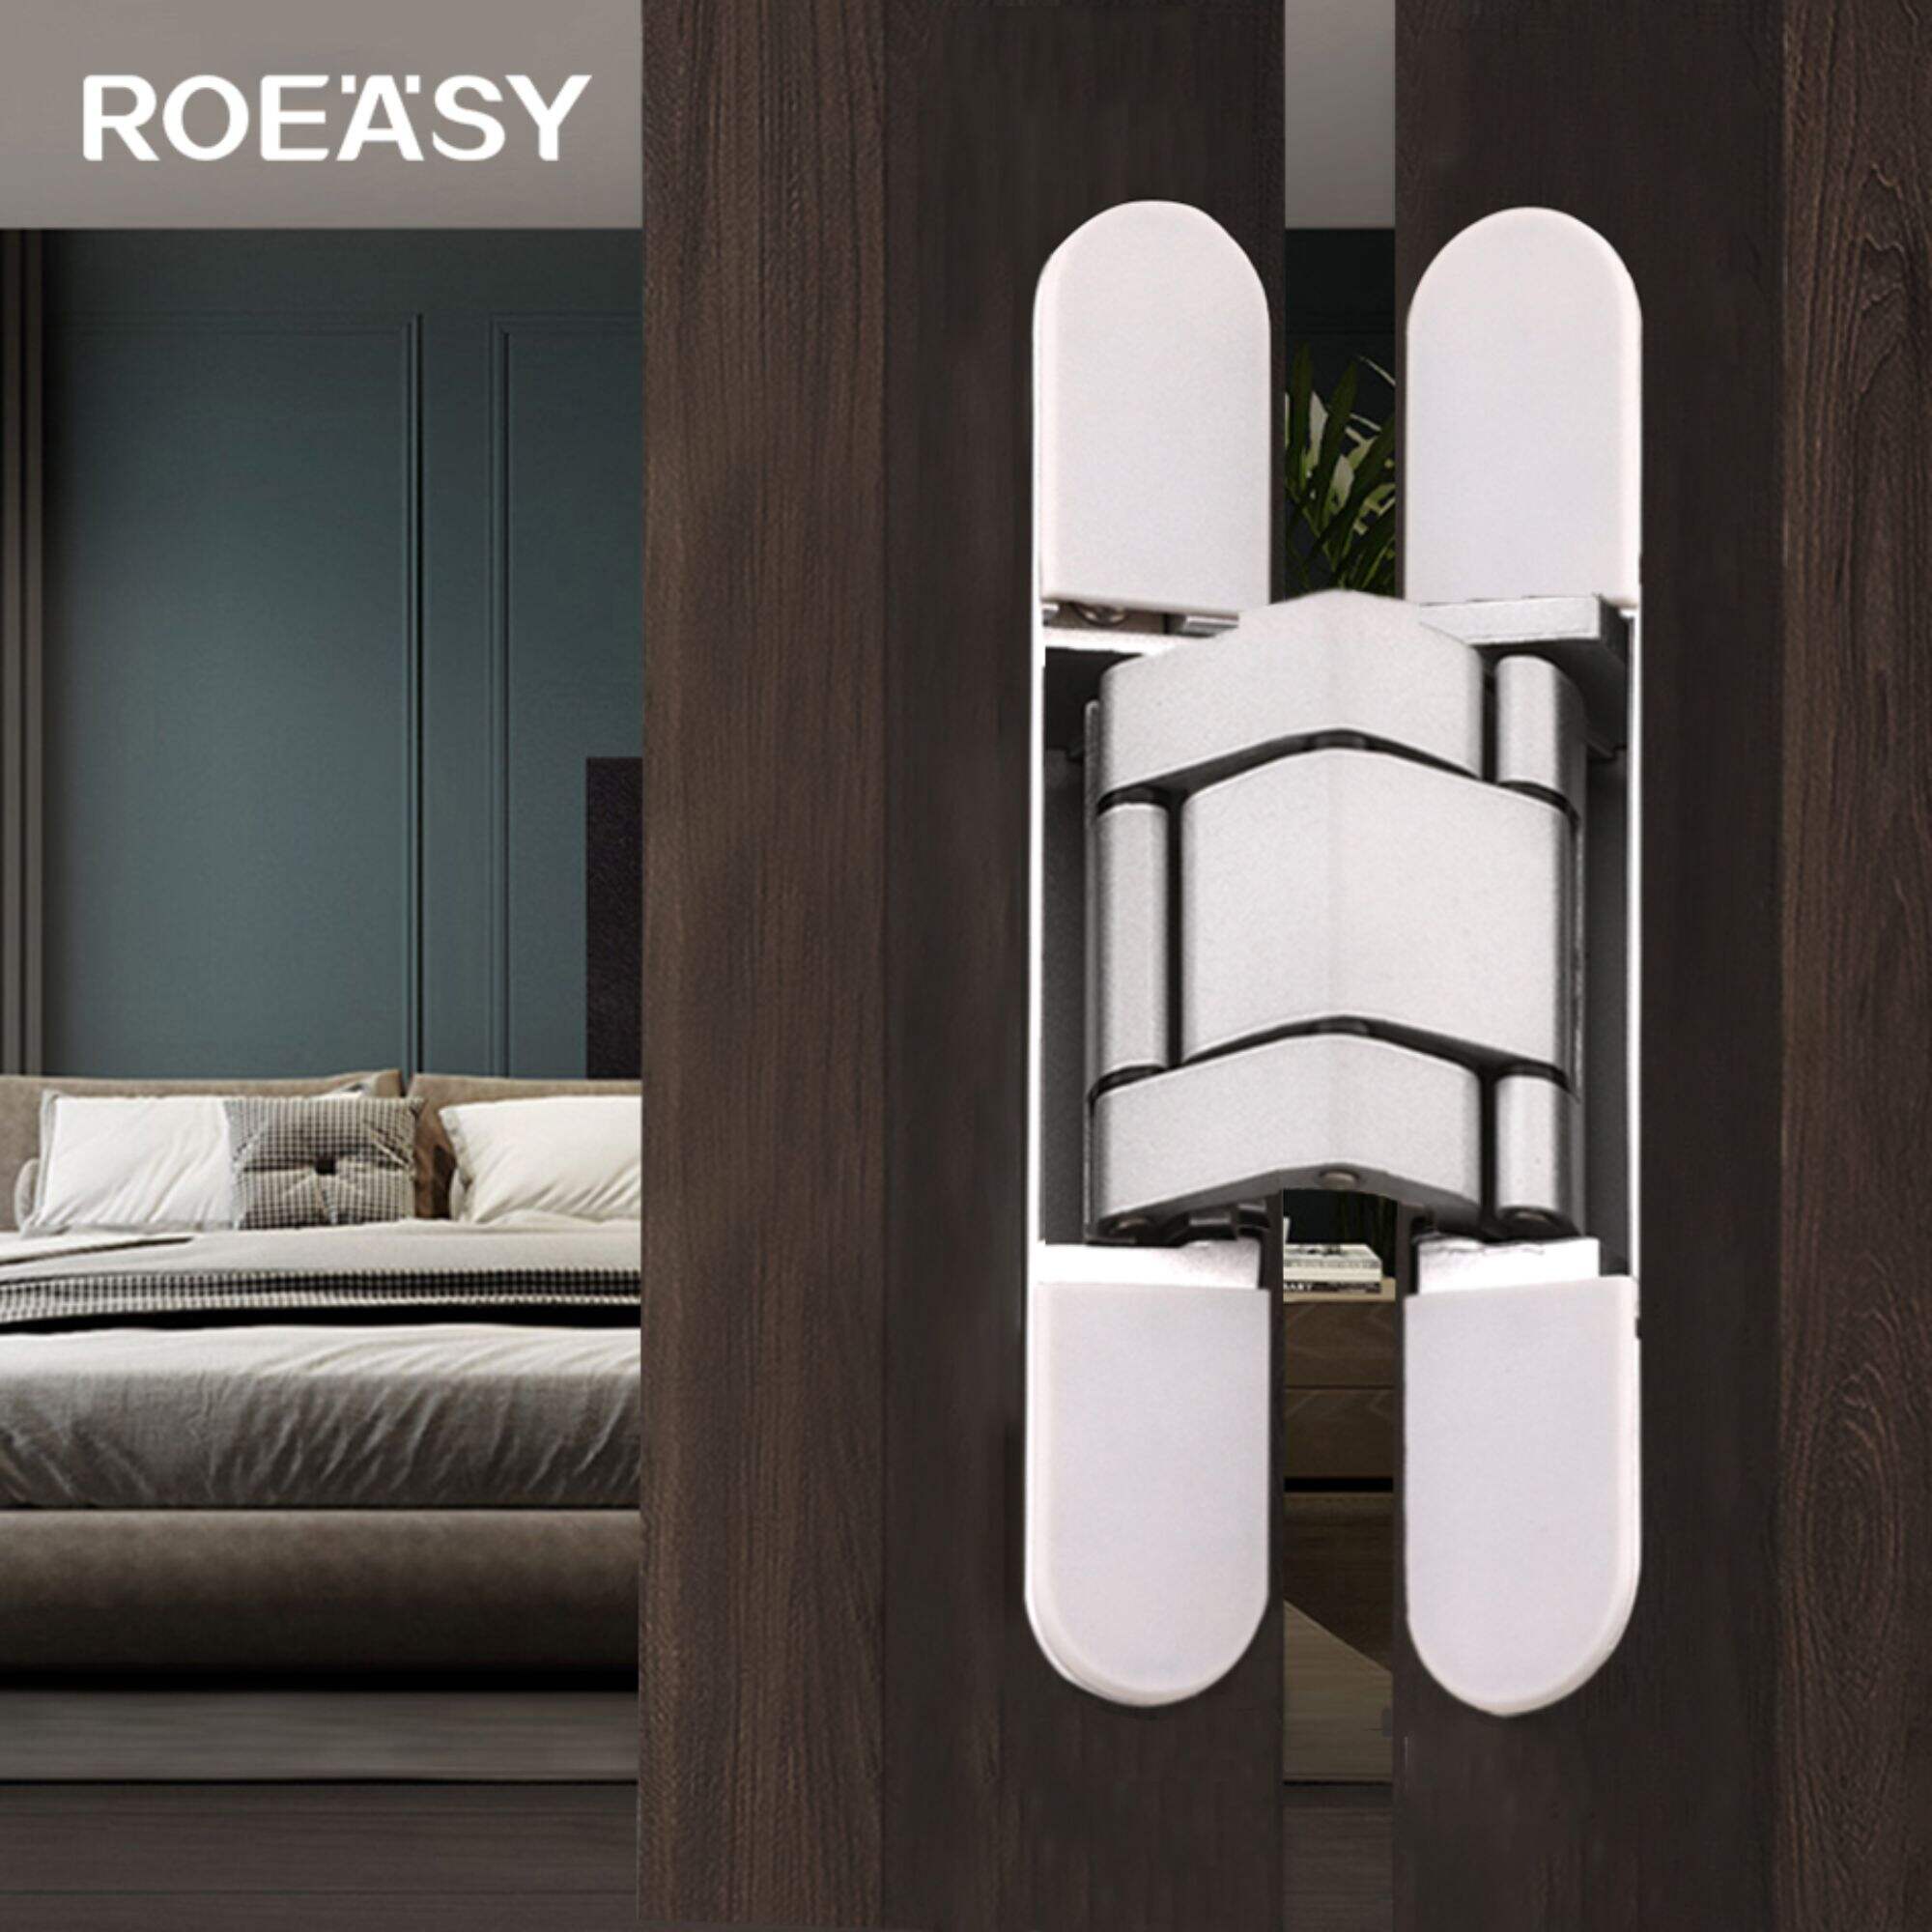 Roeasy 601HS 3D adjustable 180 degree silver invisible concealed hidden door hinges